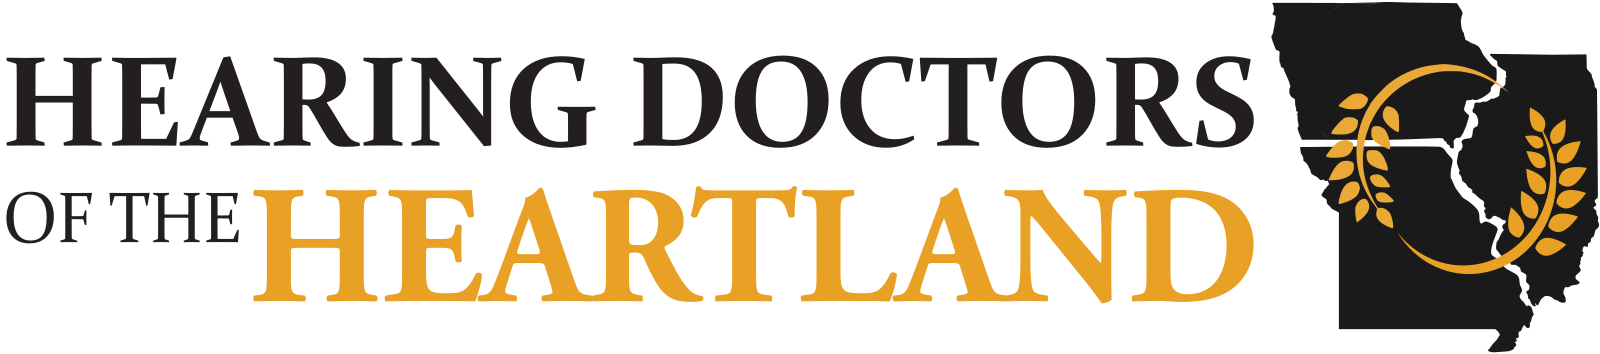 Brand logo for Hearing Doctors of the Heartland